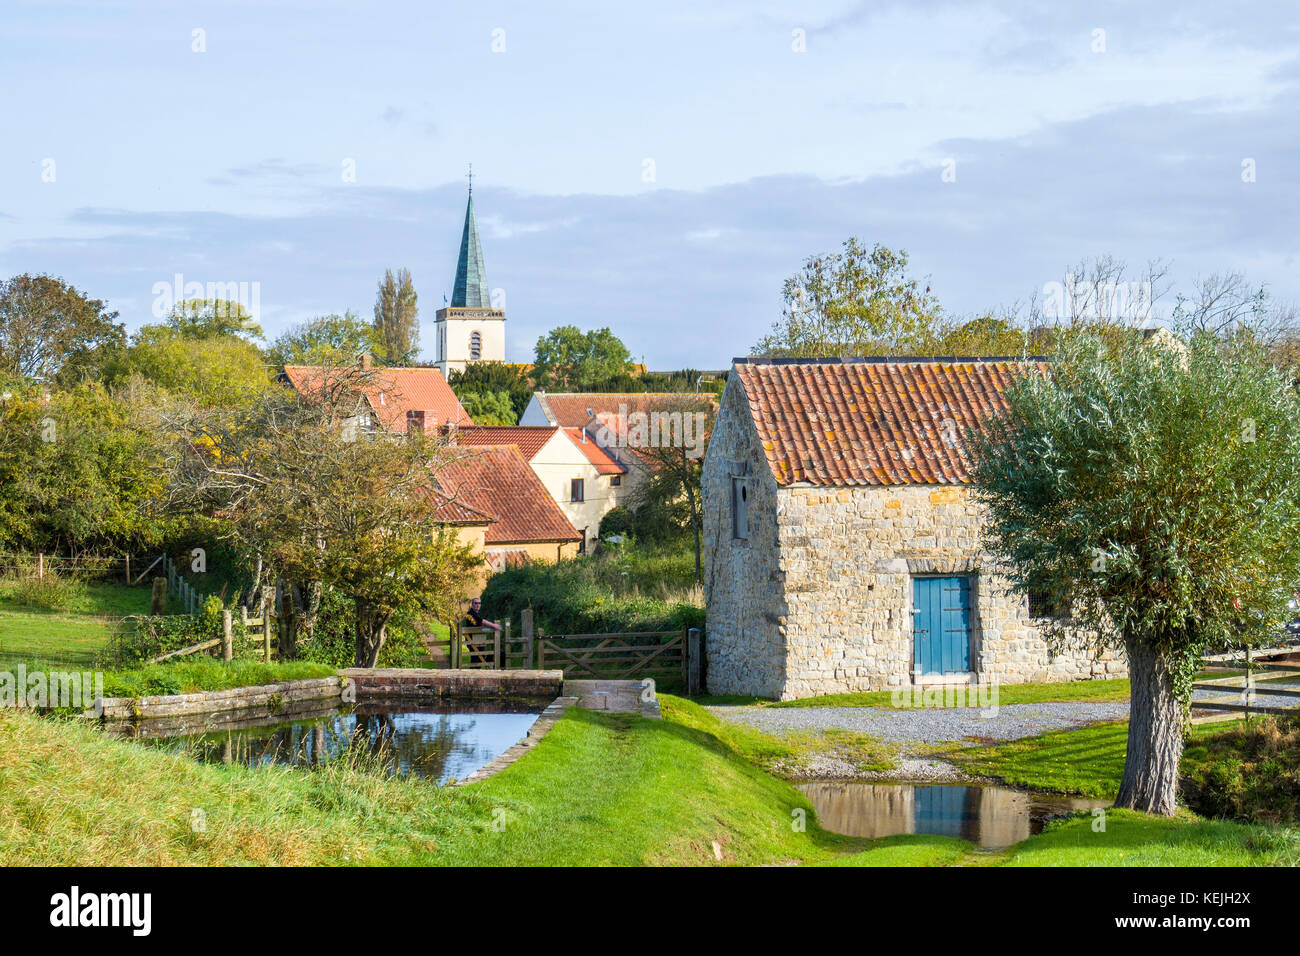 The steeple of St Andrews Church towers over the village of Stogursey, Somerset, England Stock Photo